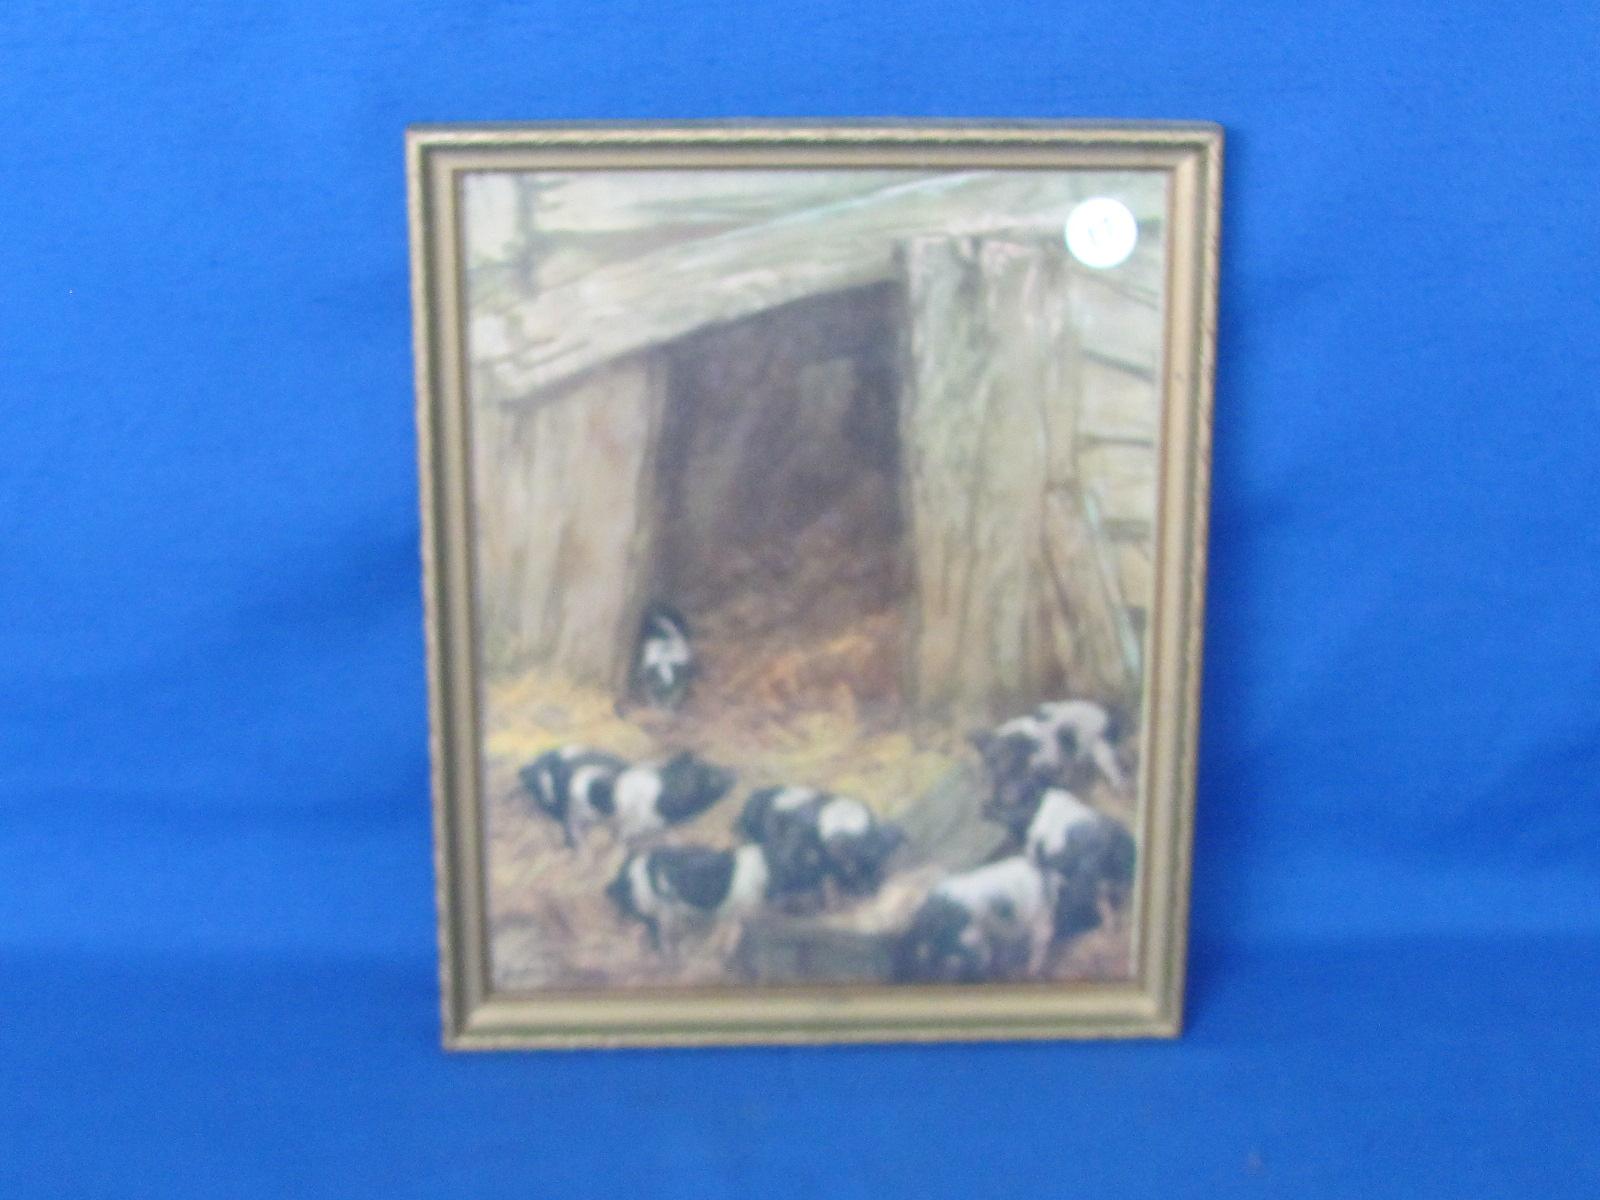 Framed Pig Print Picture by Dave ??